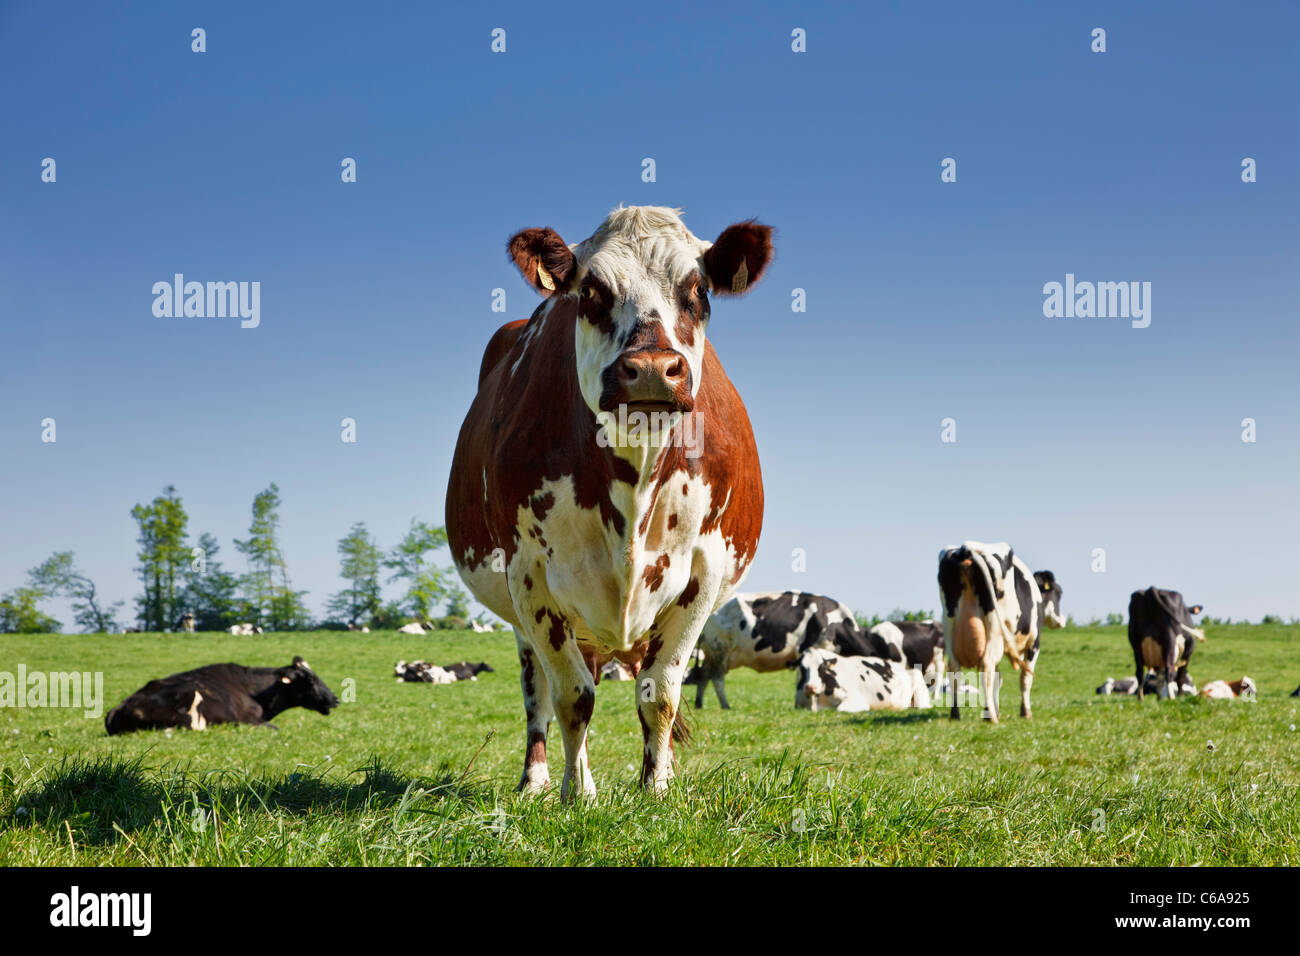 Dairy cow in a field Stock Photo